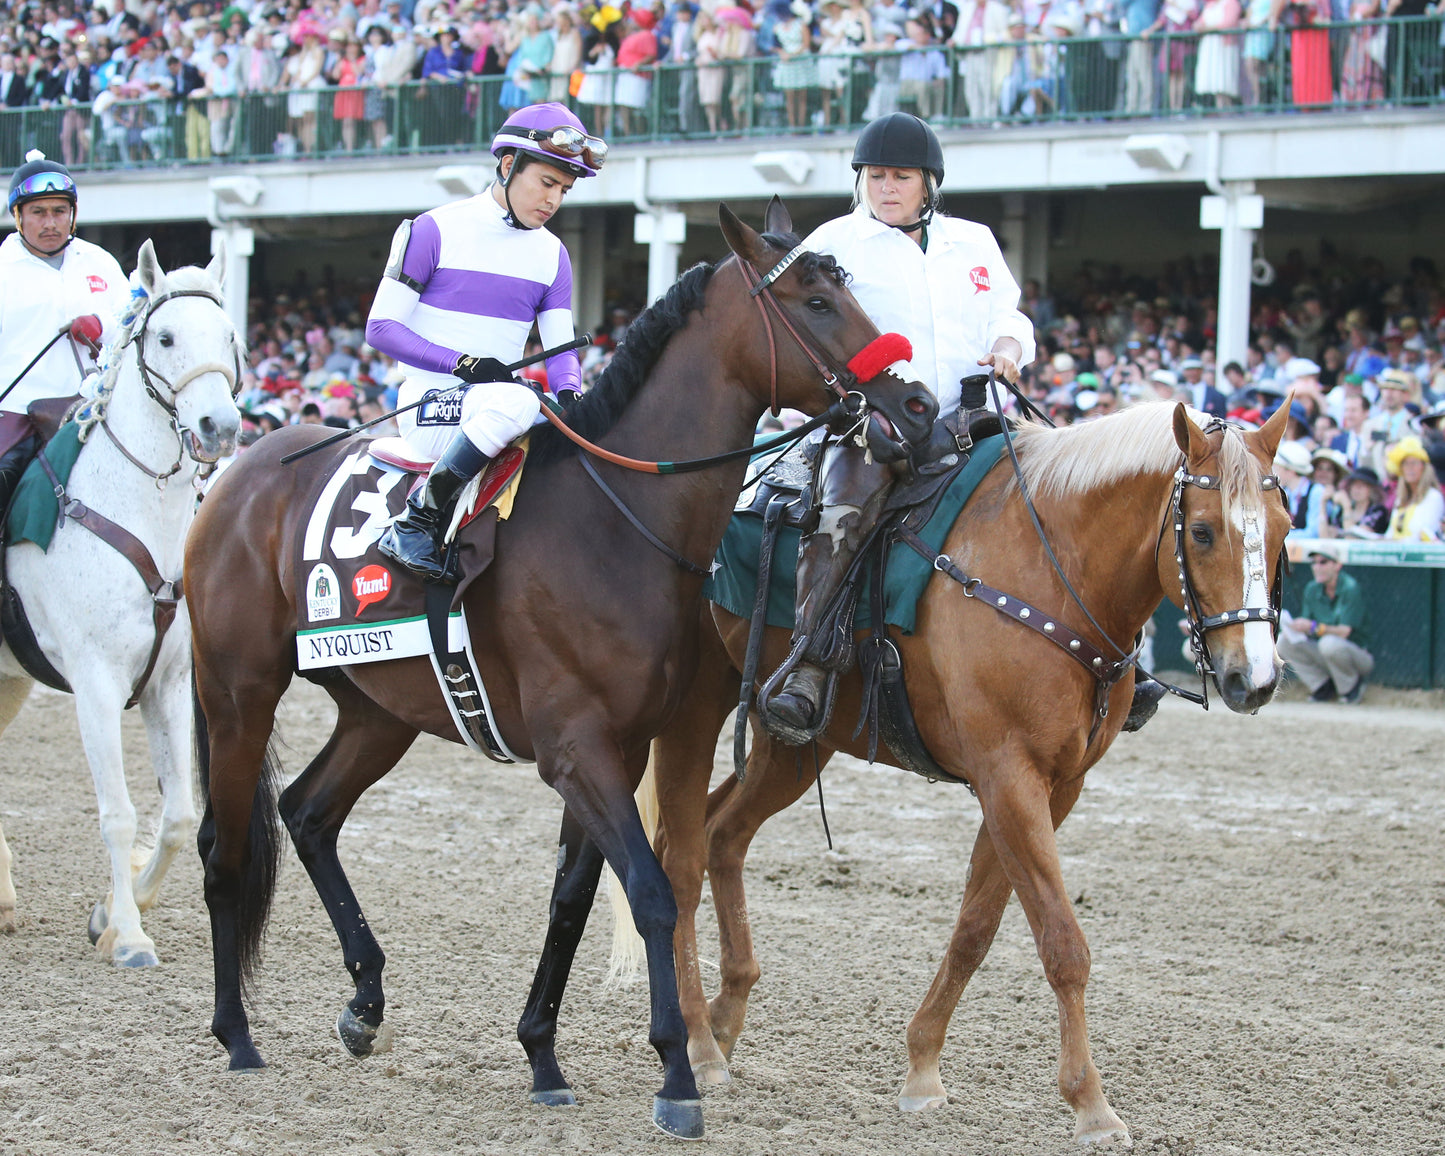 NYQUIST - 050716 - Race 12 - CD - Post Parade 02